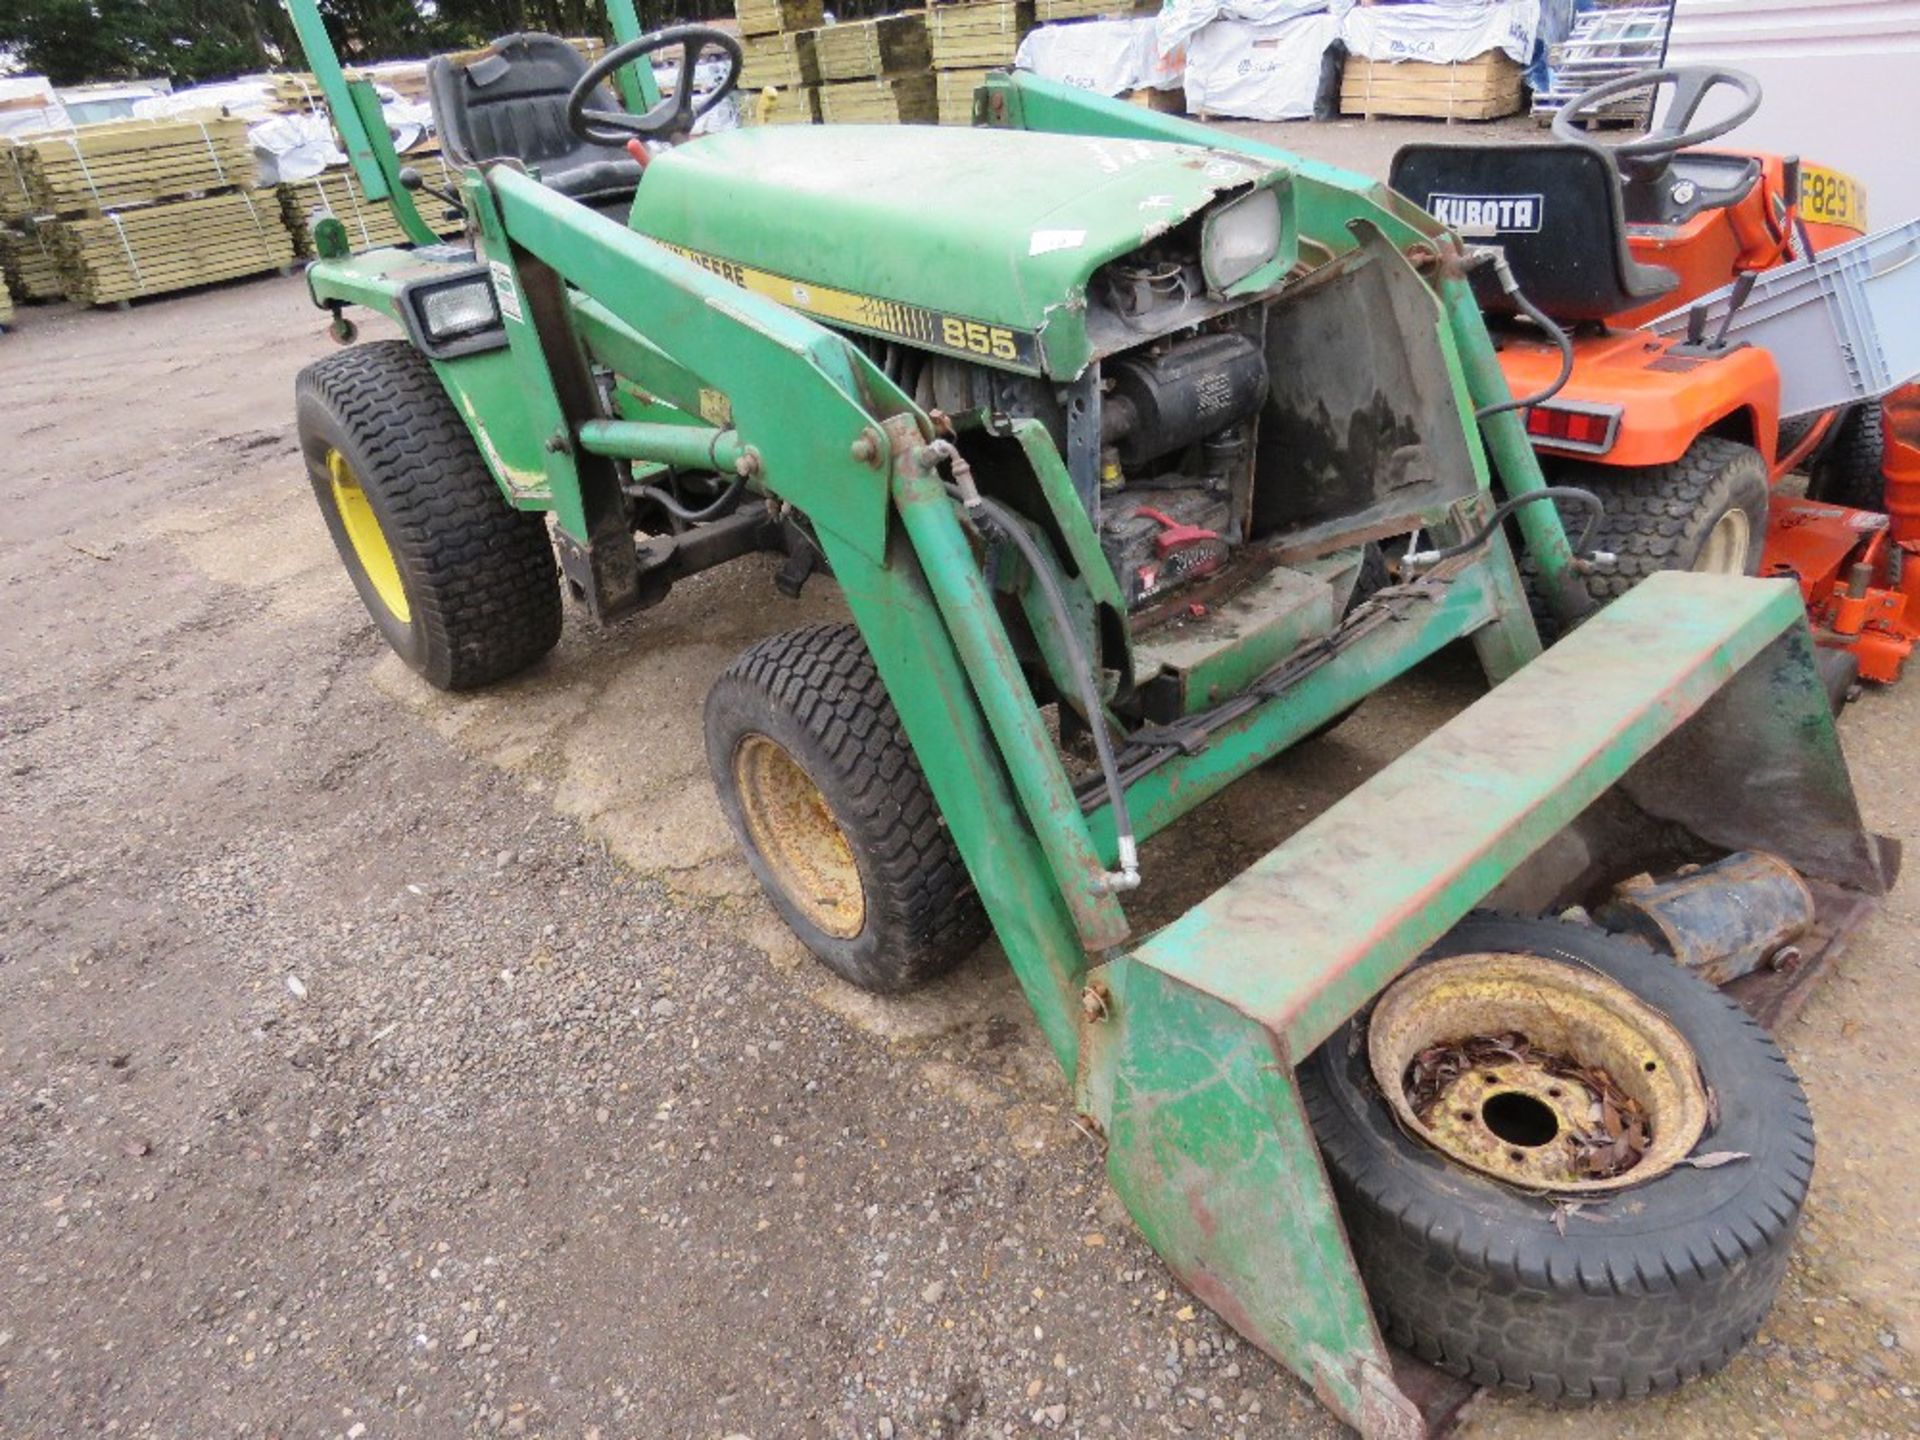 JOHN DEERE 855 4WD COMPACT TRACTOR WITH FOREND LOADER. WHEN TESTED WAS SEEN TO TURN OVER BUT NOT STA